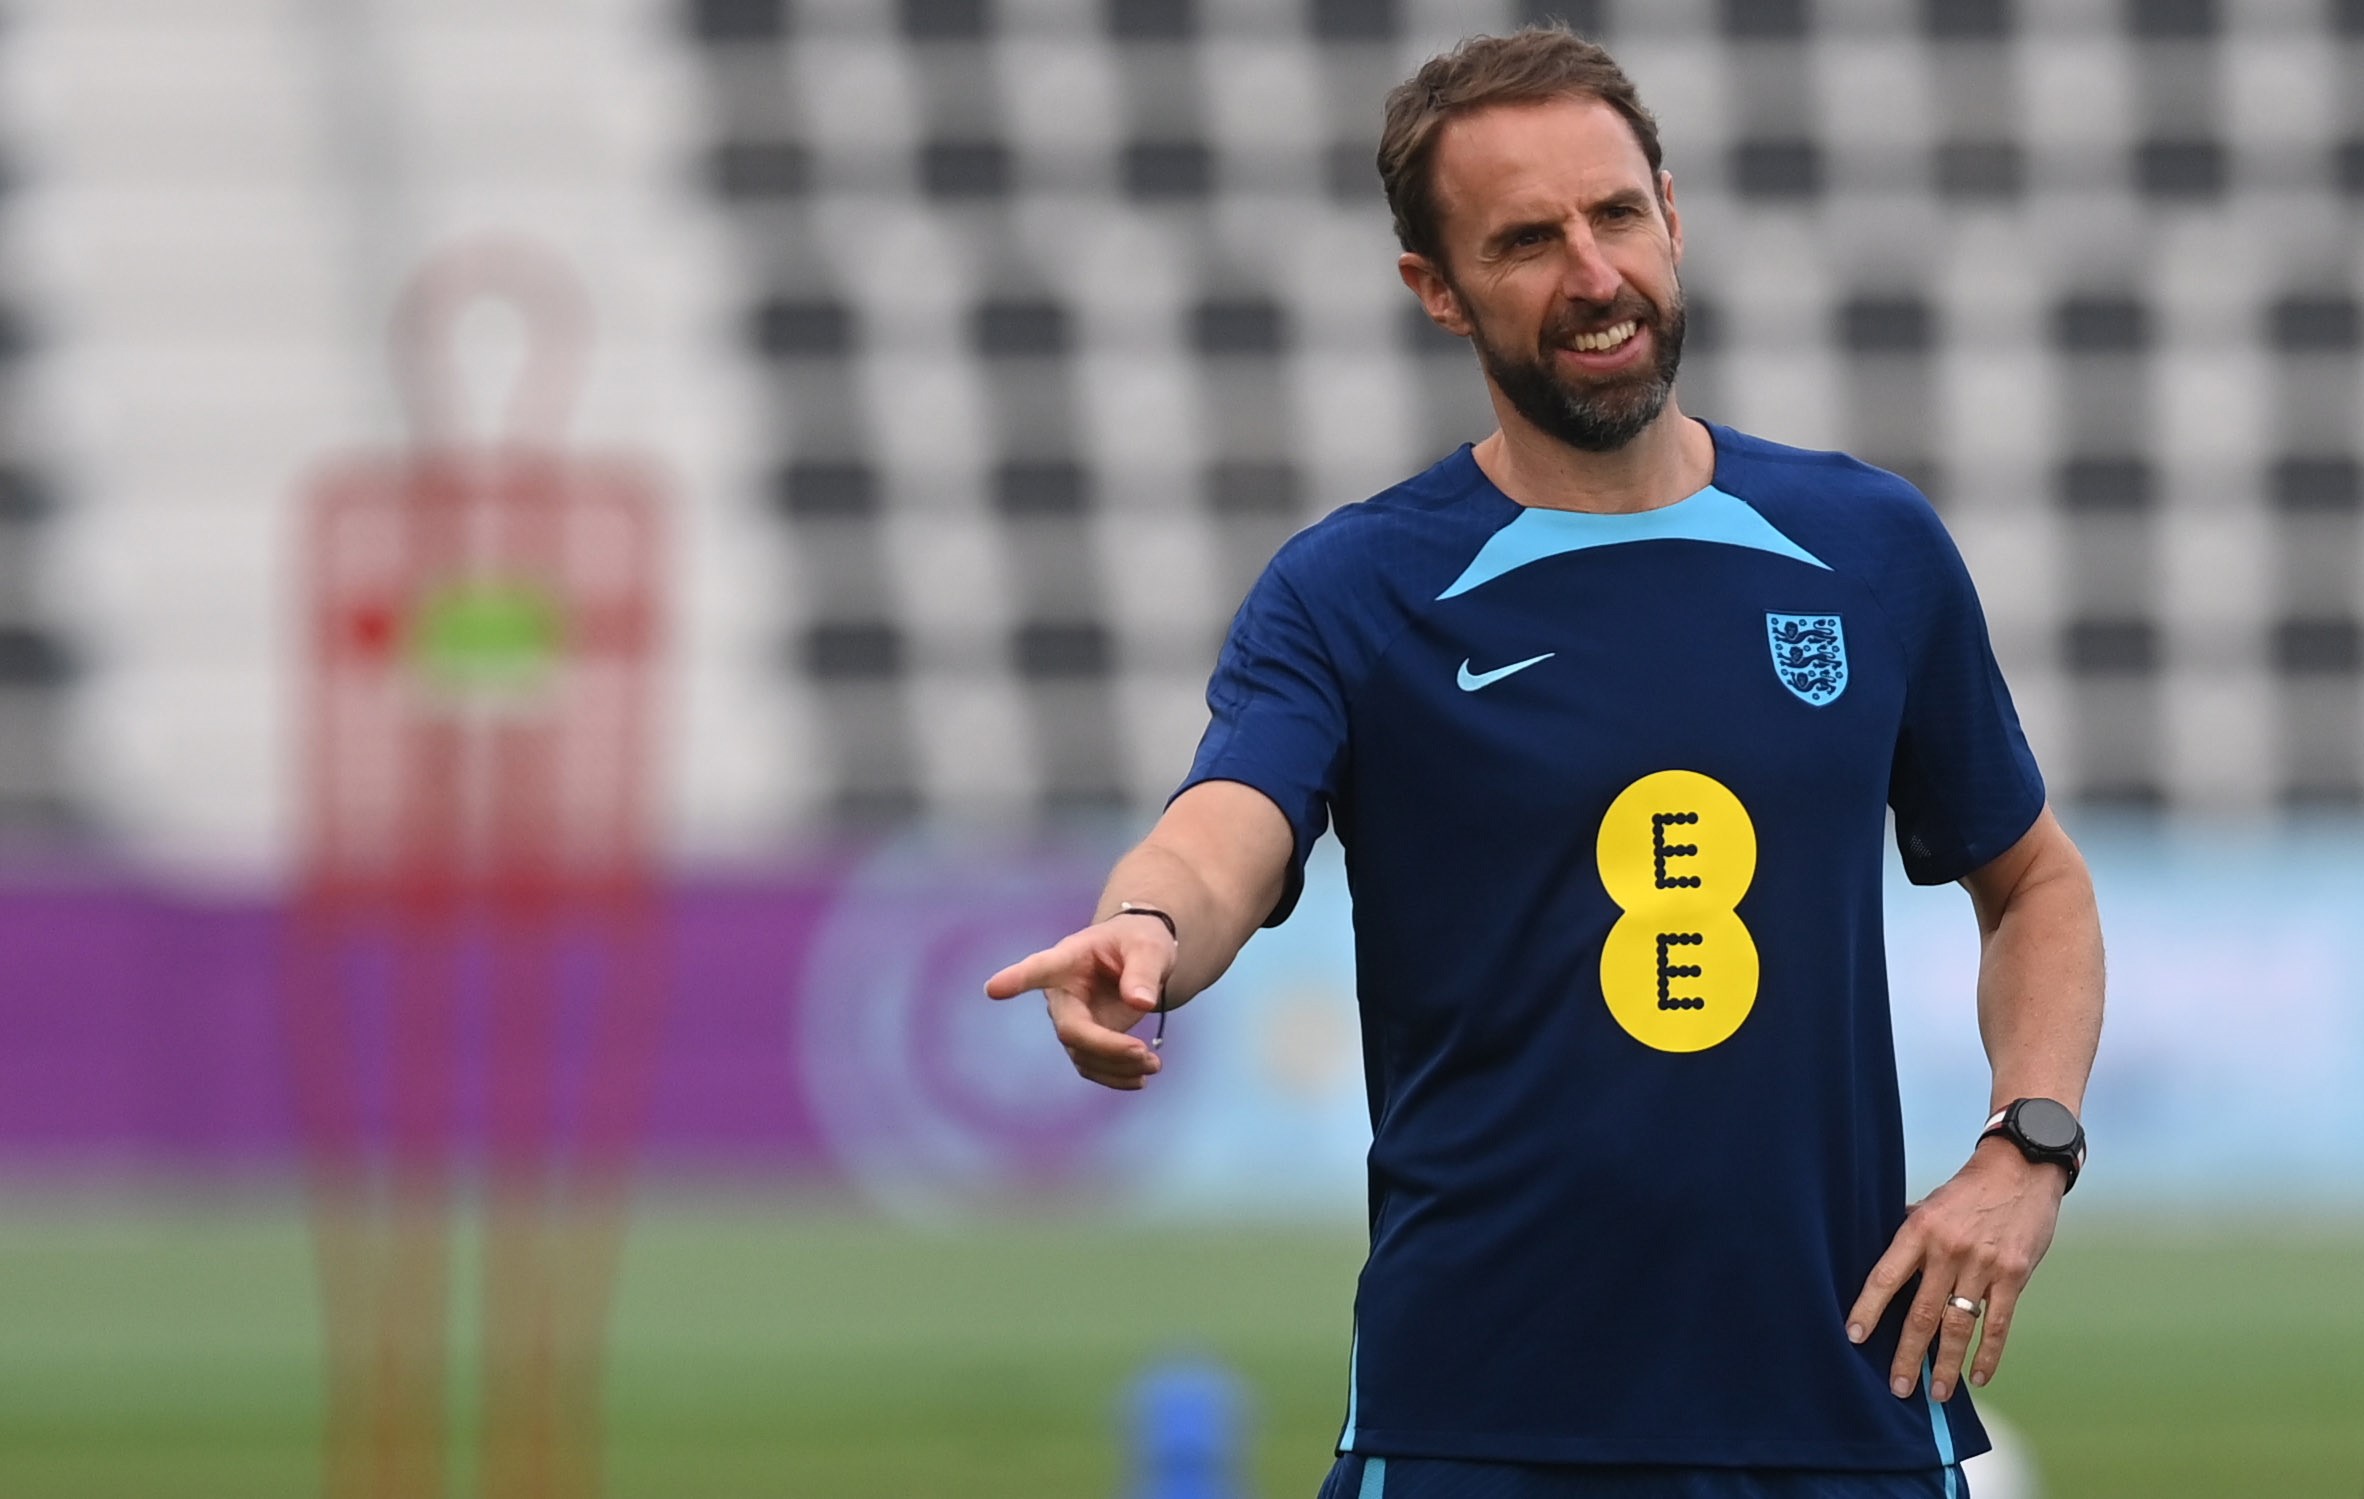 epa10353537 England manager Gareth Southgate leads his team's training session in Doha, Qatar, 07 December 2022. England will face France in their FIFA World Cup 2022 quarter final soccer match on 10 December 2022.  EPA/NEIL HALL